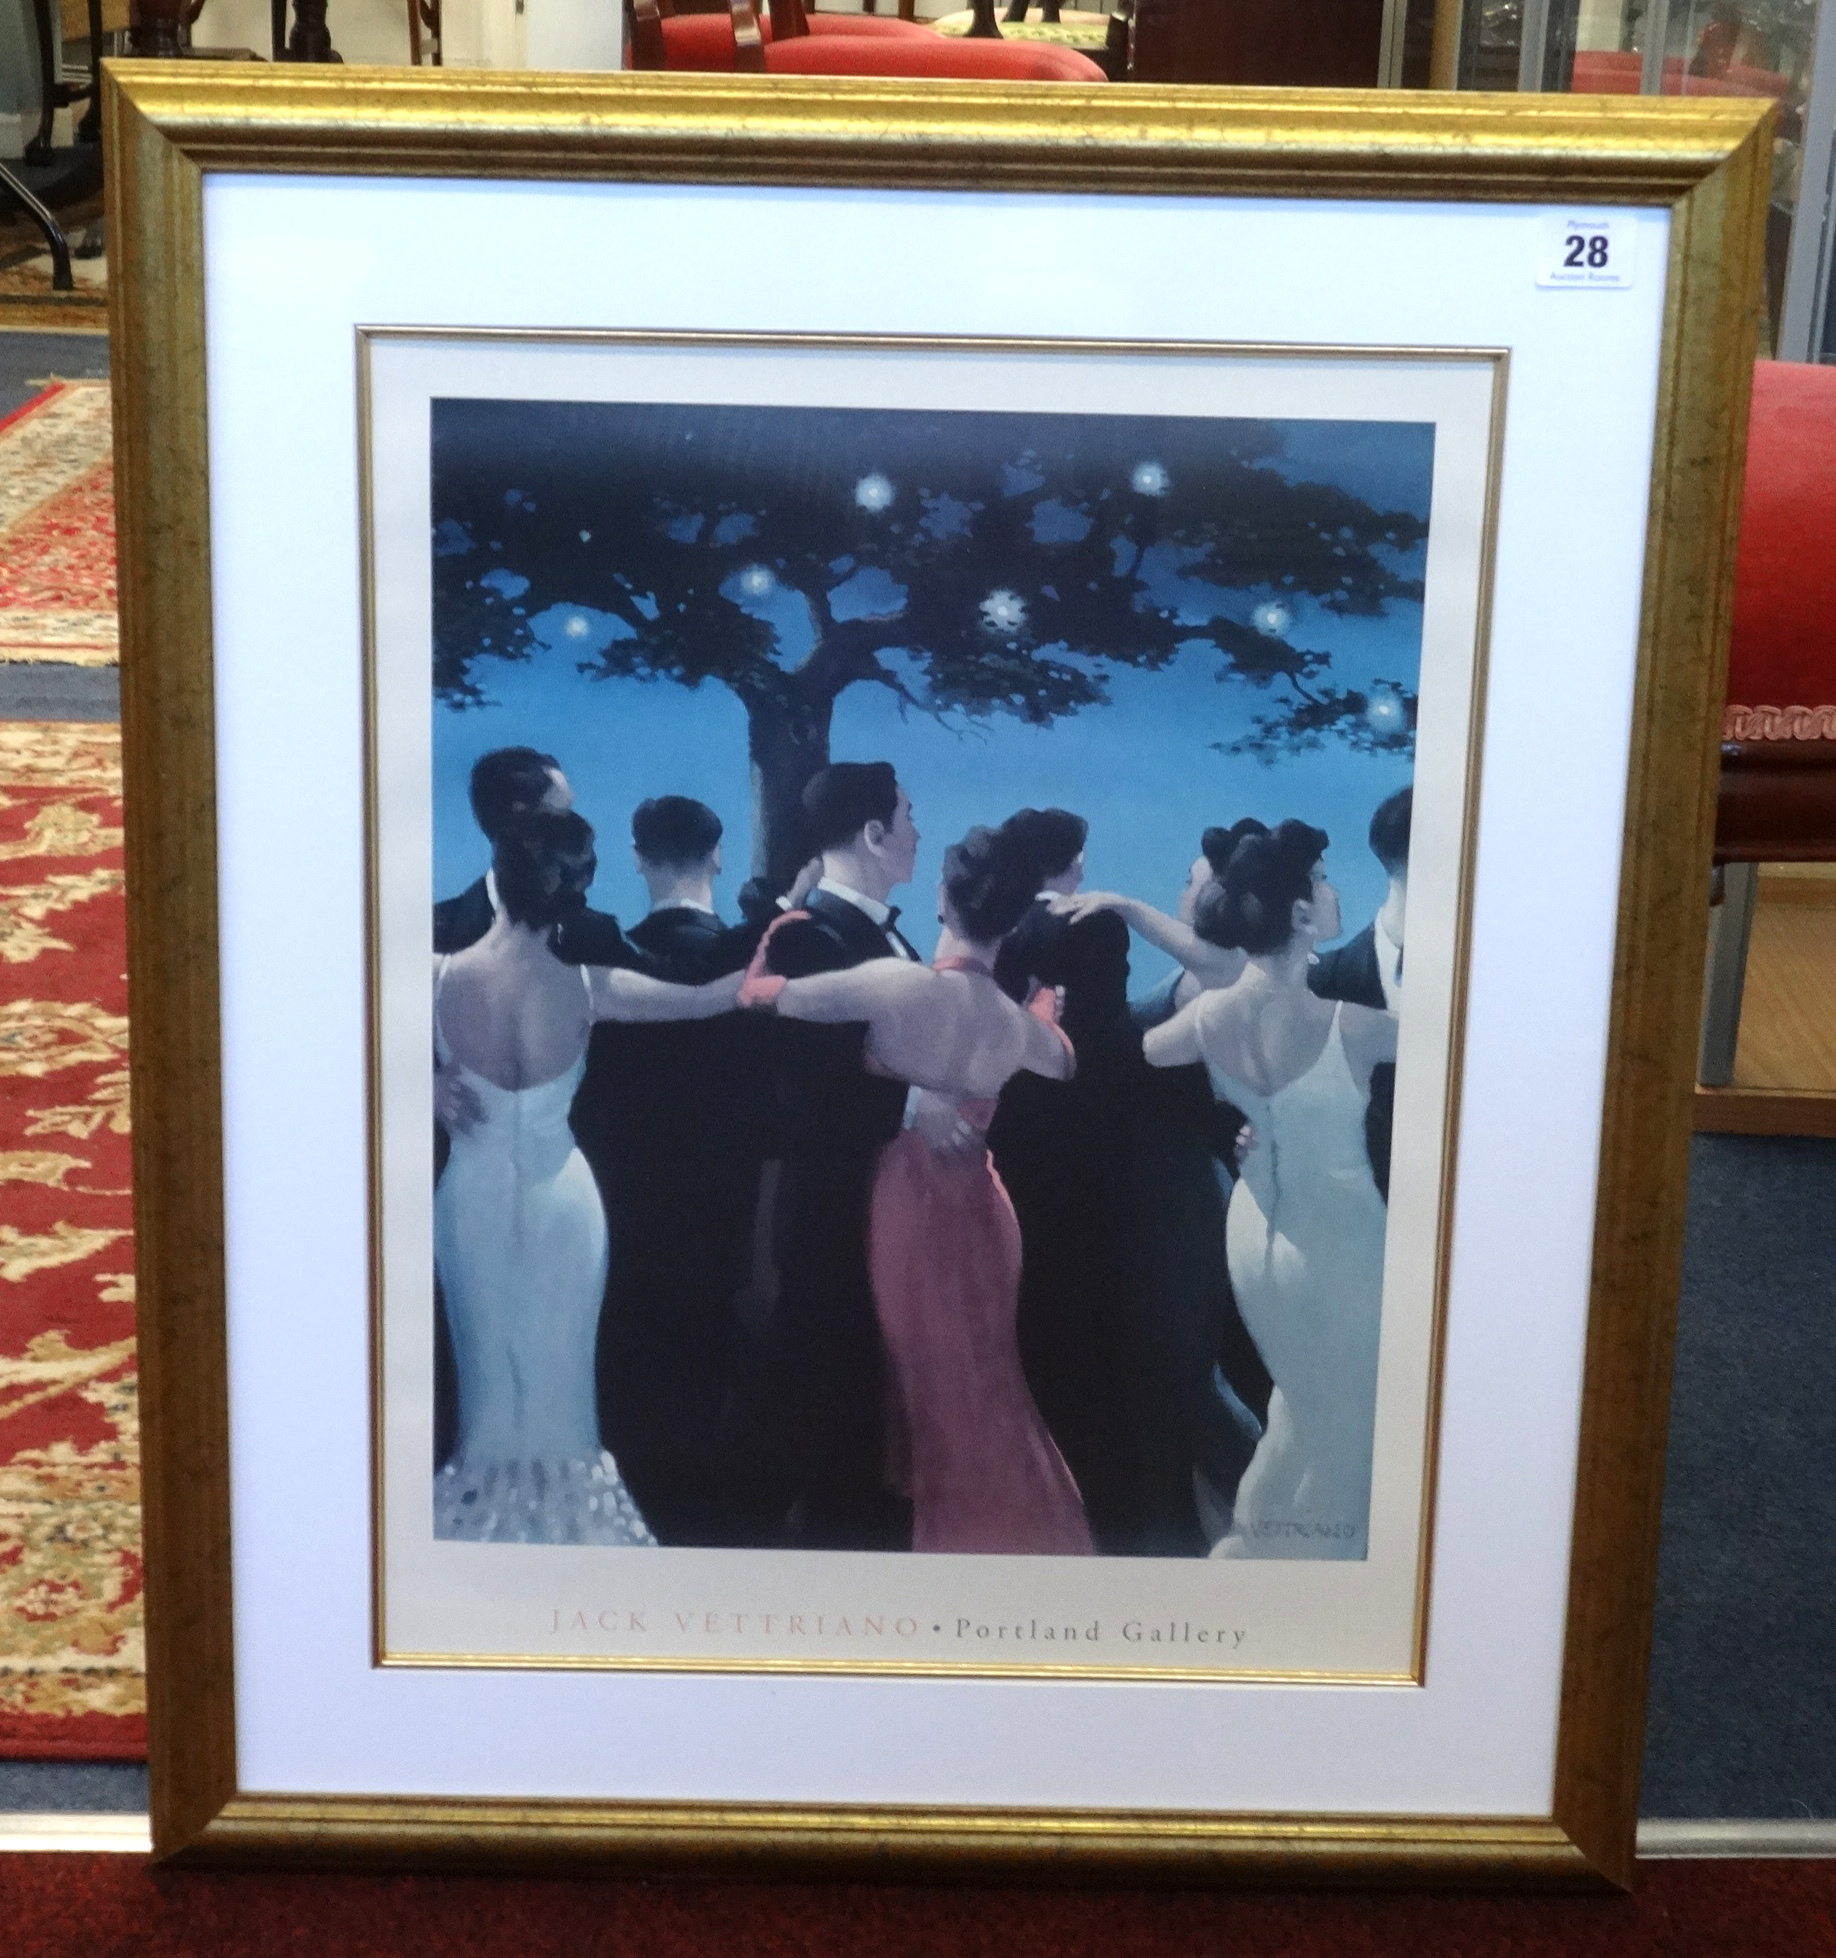 Jack Vettriano, poster from The Portland Gallery, 'The Waltzers', together with a signed copy of the